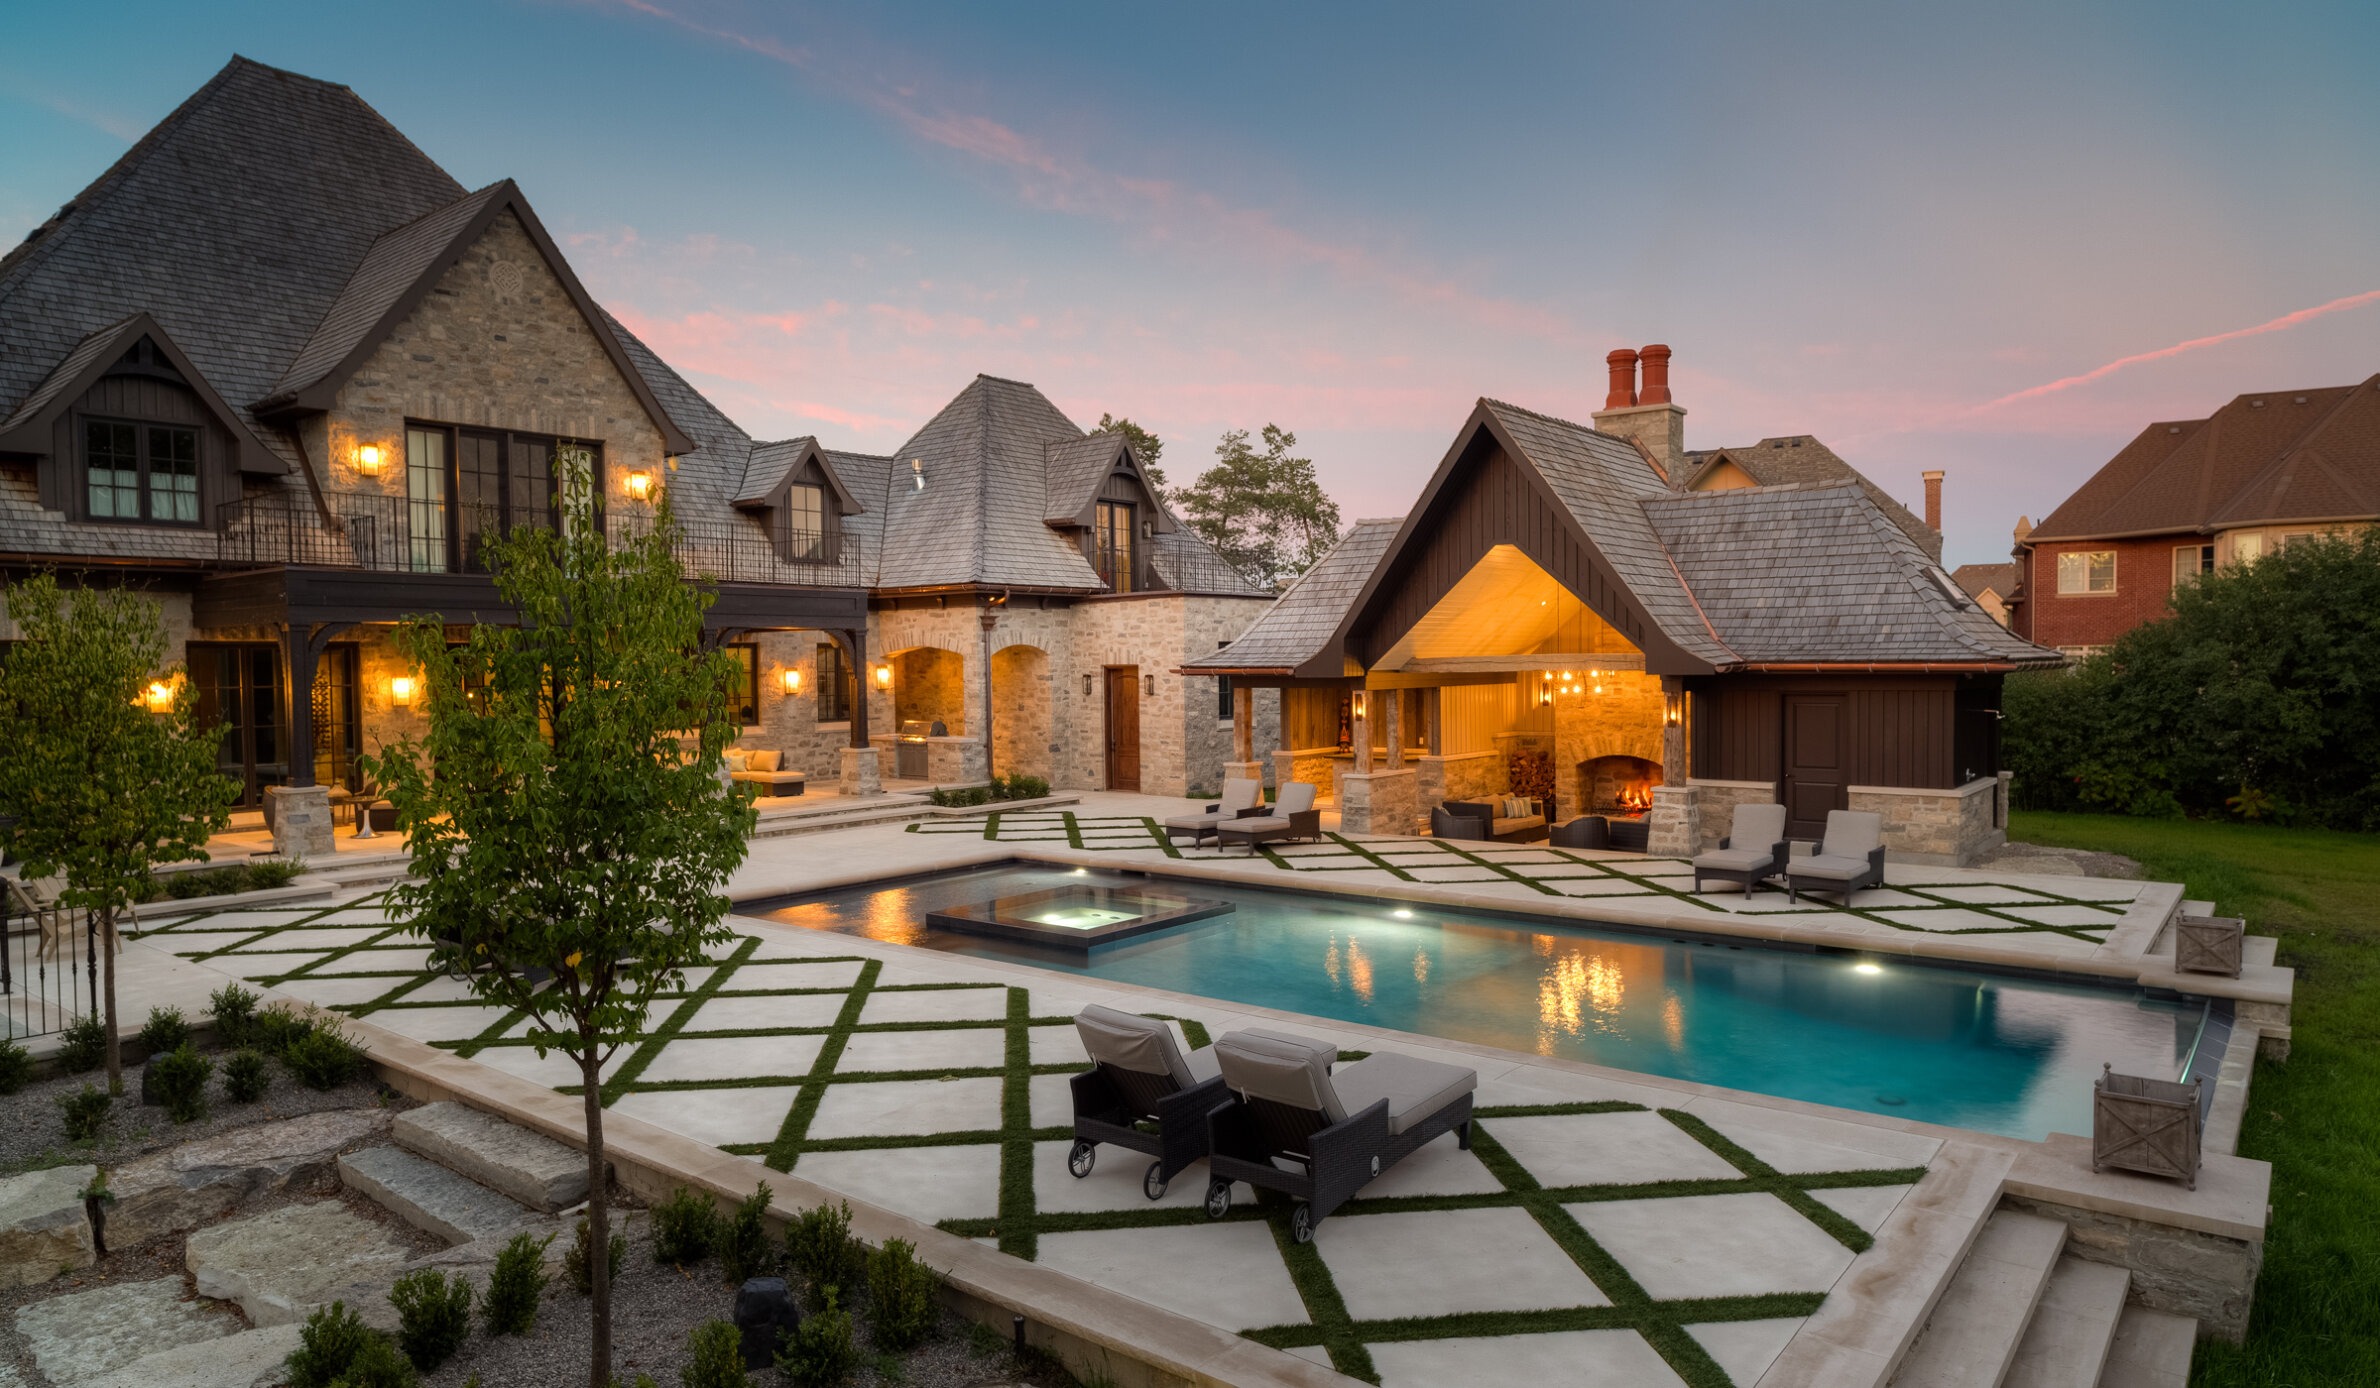 Luxurious backyard with a pool, lounging chairs, lush landscaping, and a stone house with lit windows at dusk under a soft pink sky.